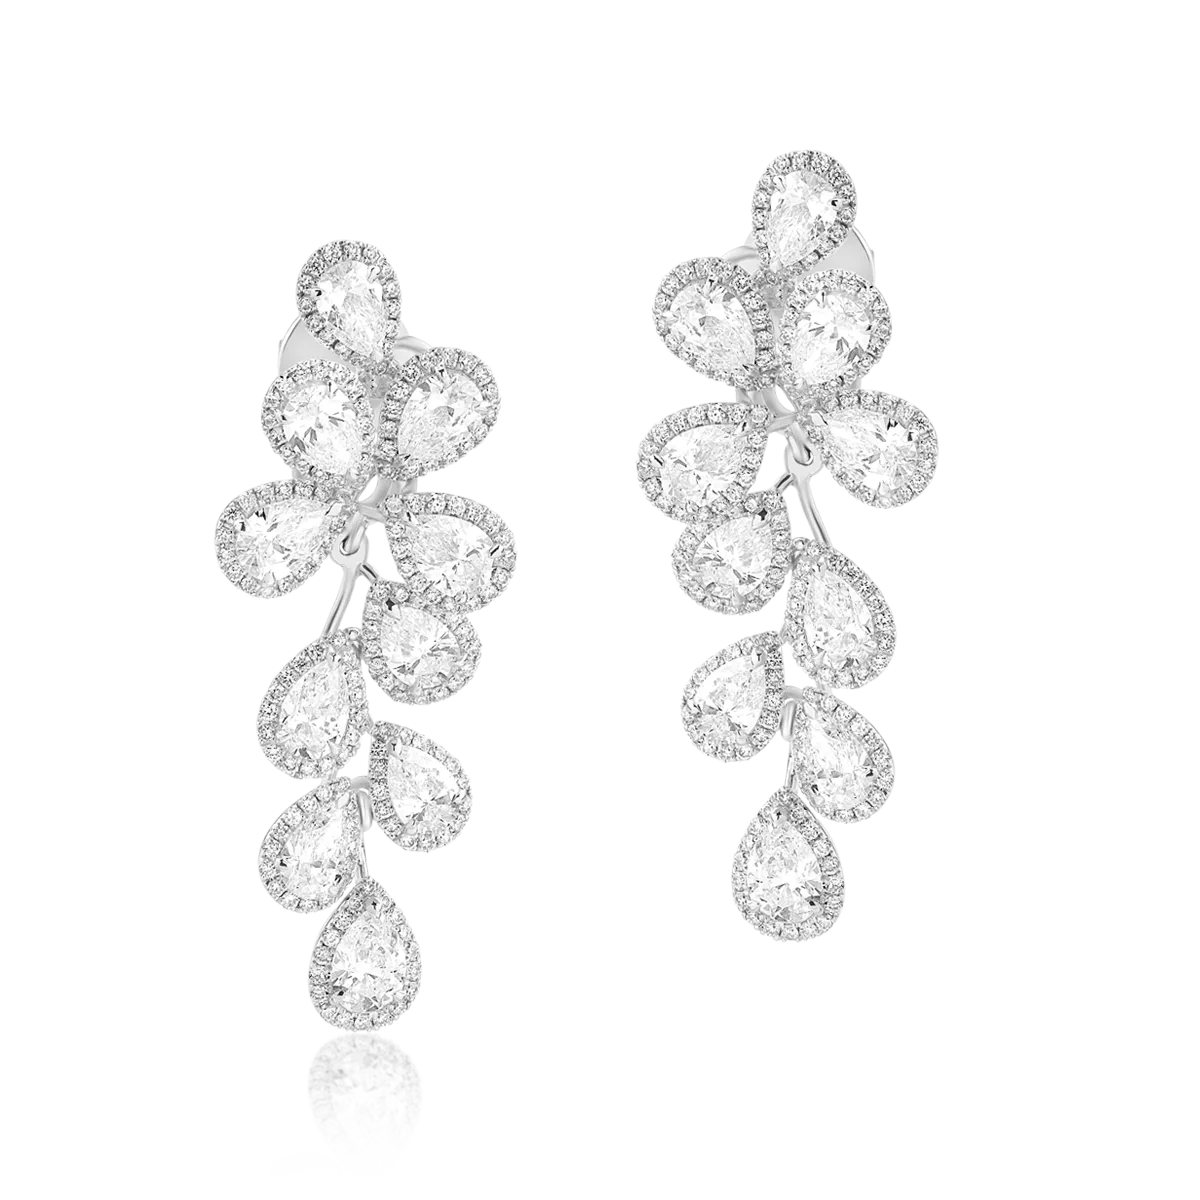 18K white gold earrings with 7.49ct diamonds